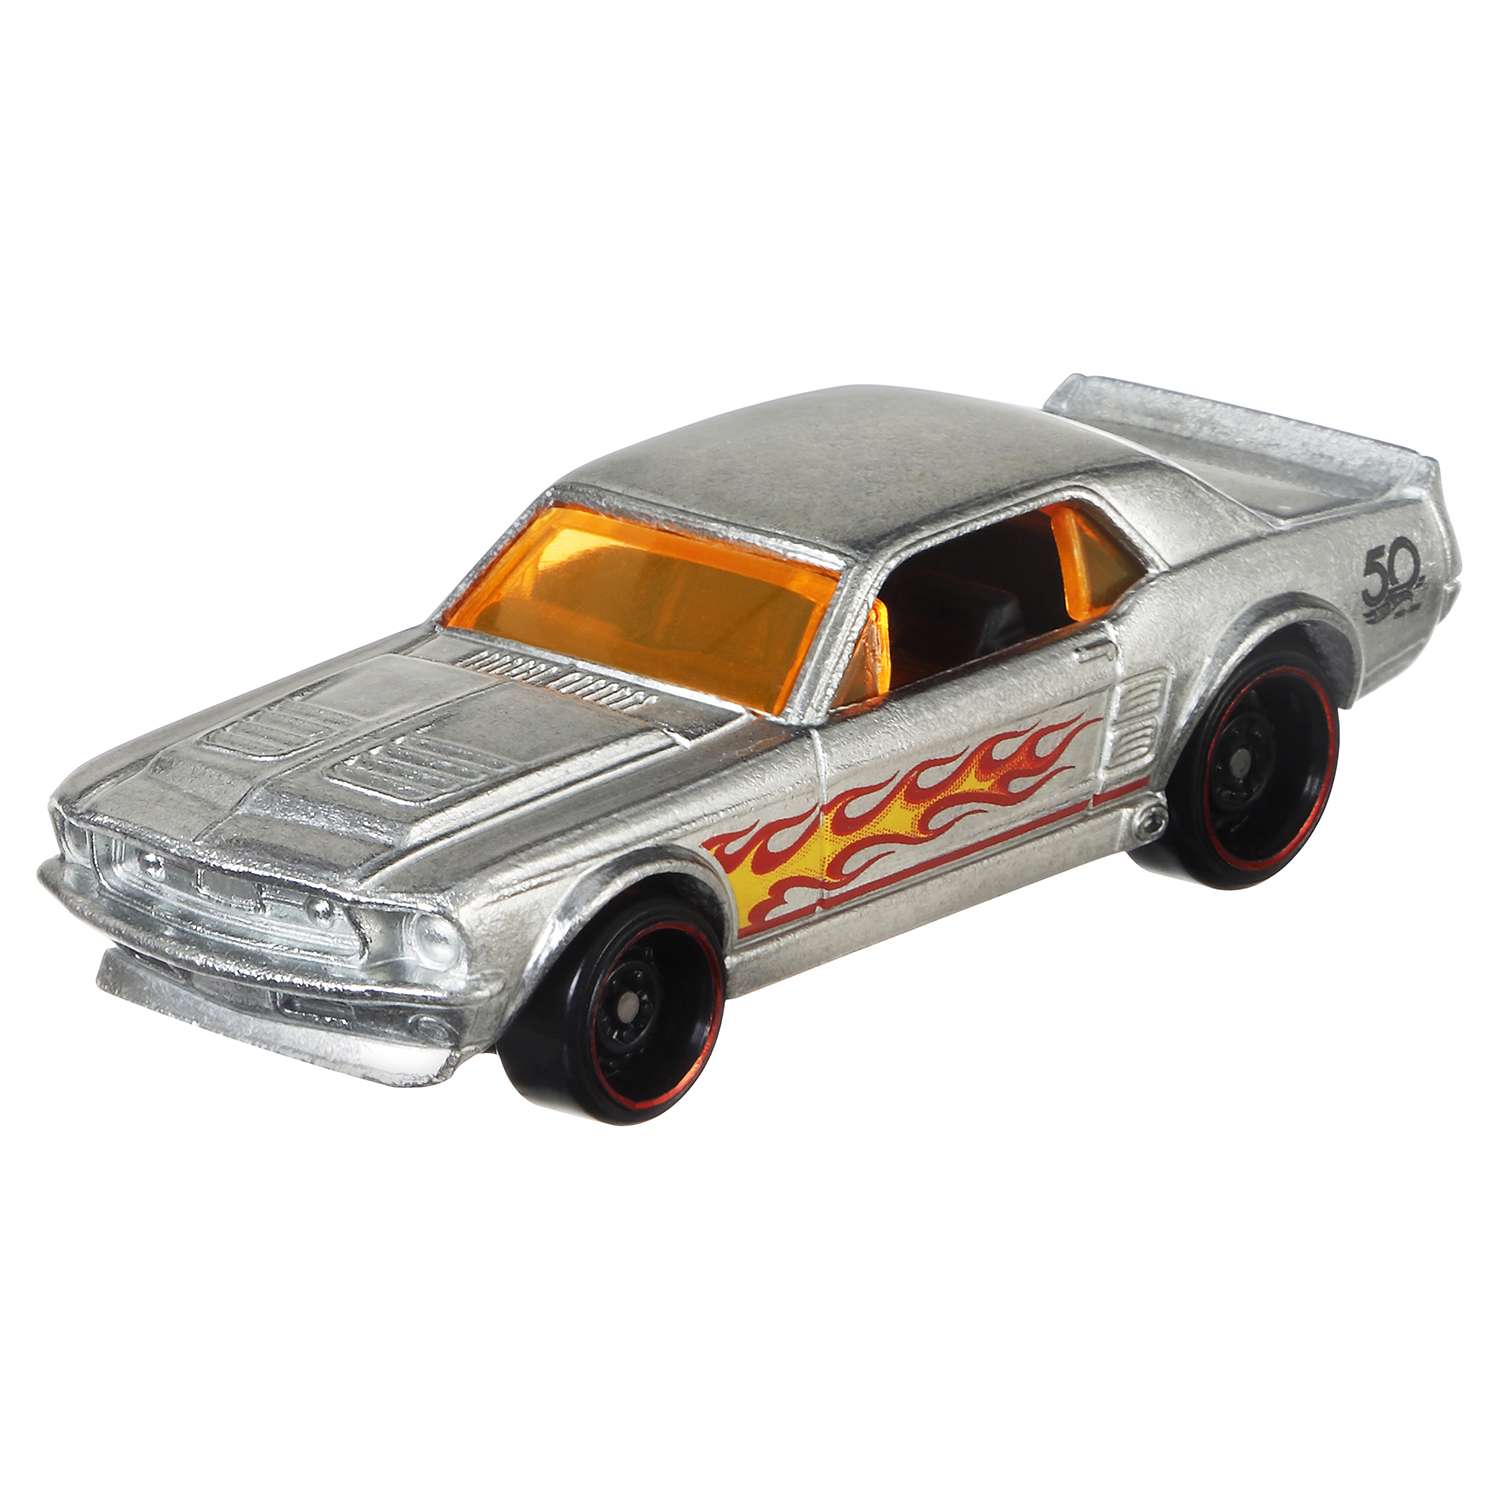 Купить машинку хотвилс. 67 Mustang Coupe hot Wheels. Hot Wheels 67 Ford Mustang Coupe. Ford Mustang hot Wheels 50th Anniversary. Hot Wheels Ford Mustang 67.